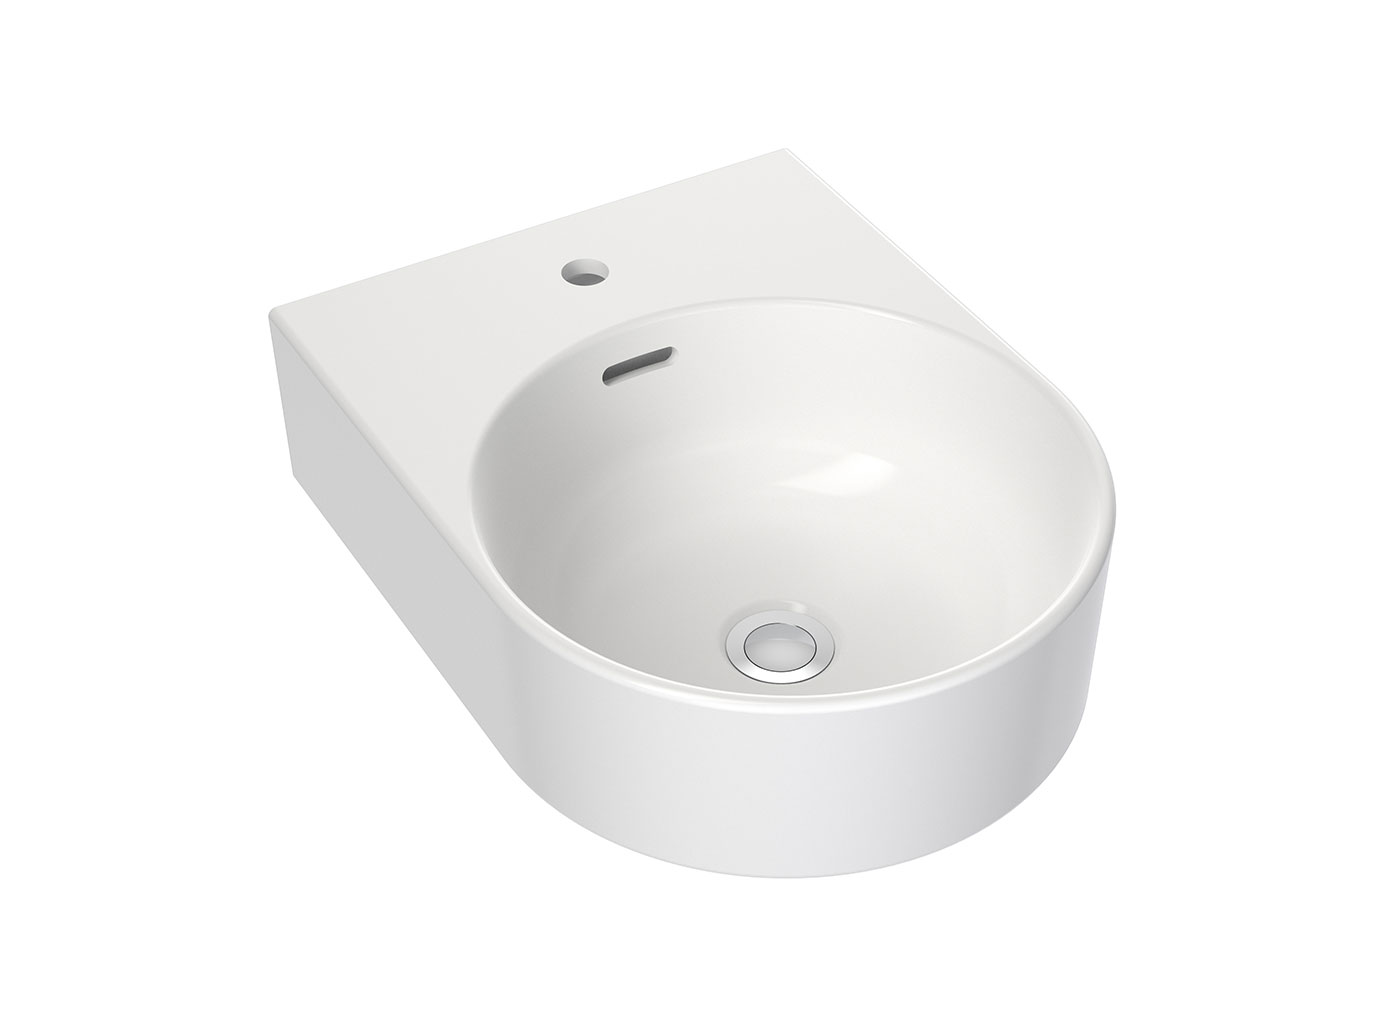 Trying to make your small bathroom look big? Check out Clark's wall basins.